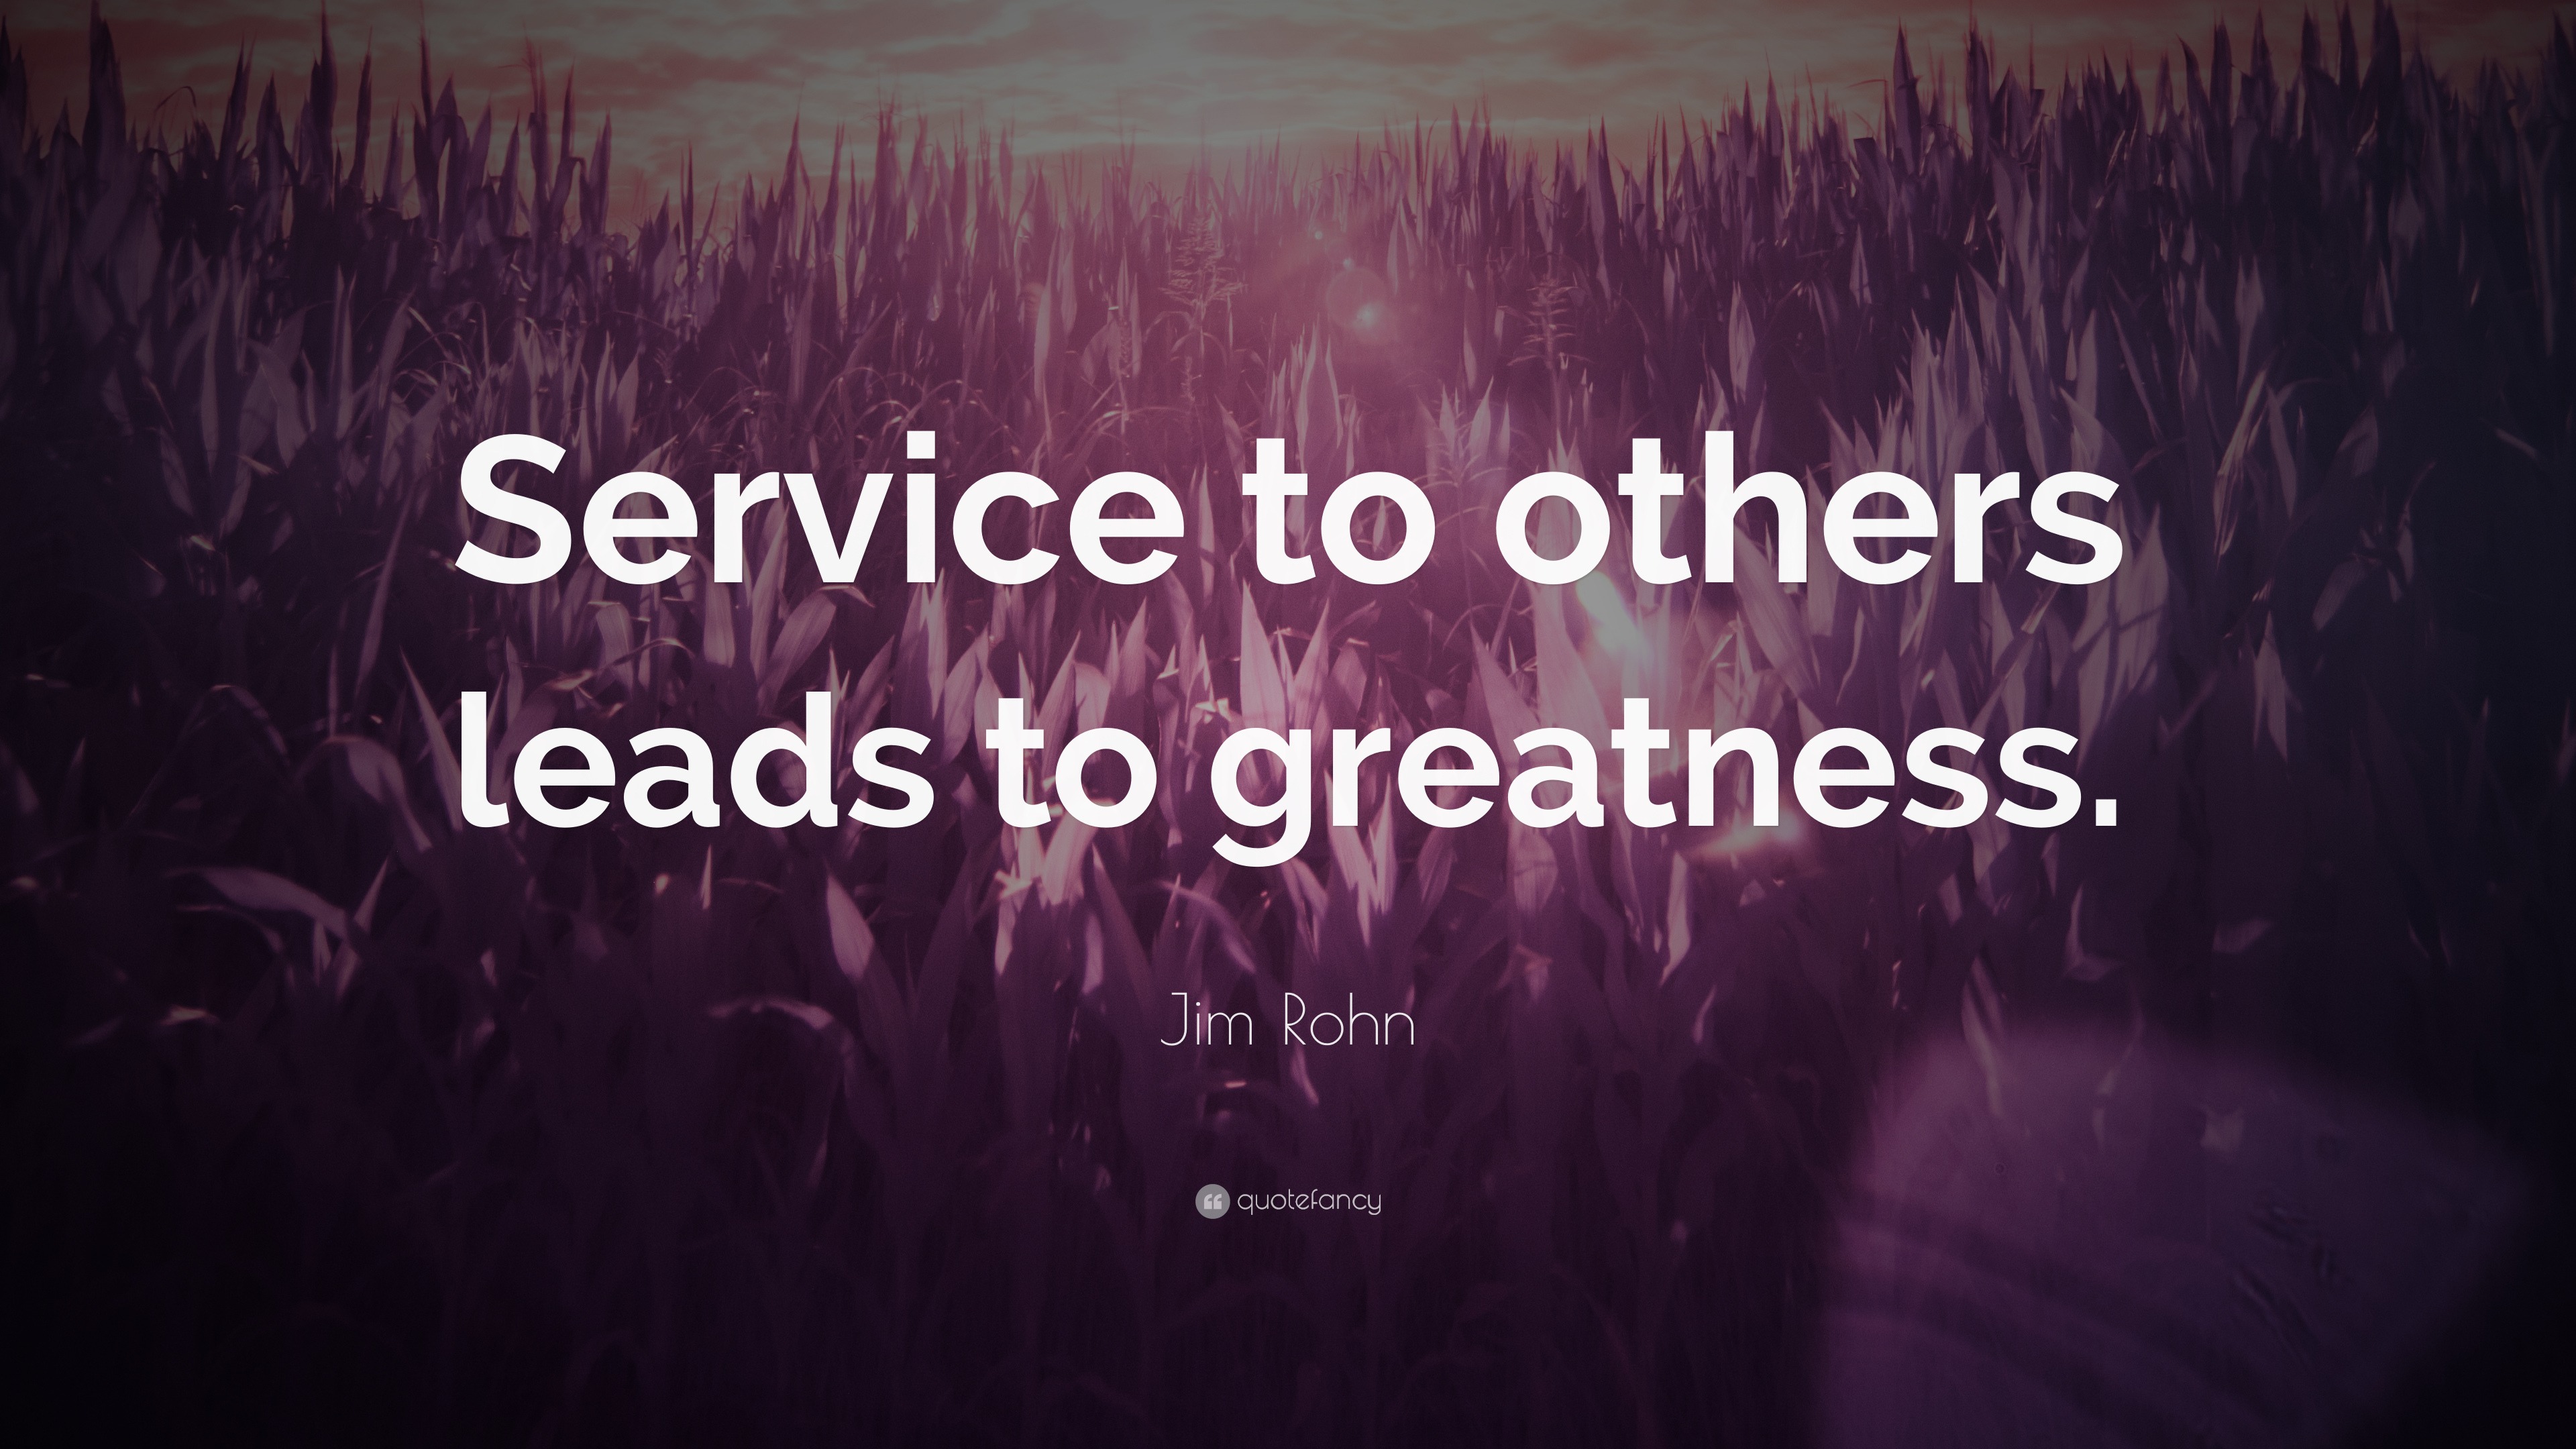 Jim Rohn Quote “Service to others leads to greatness.”